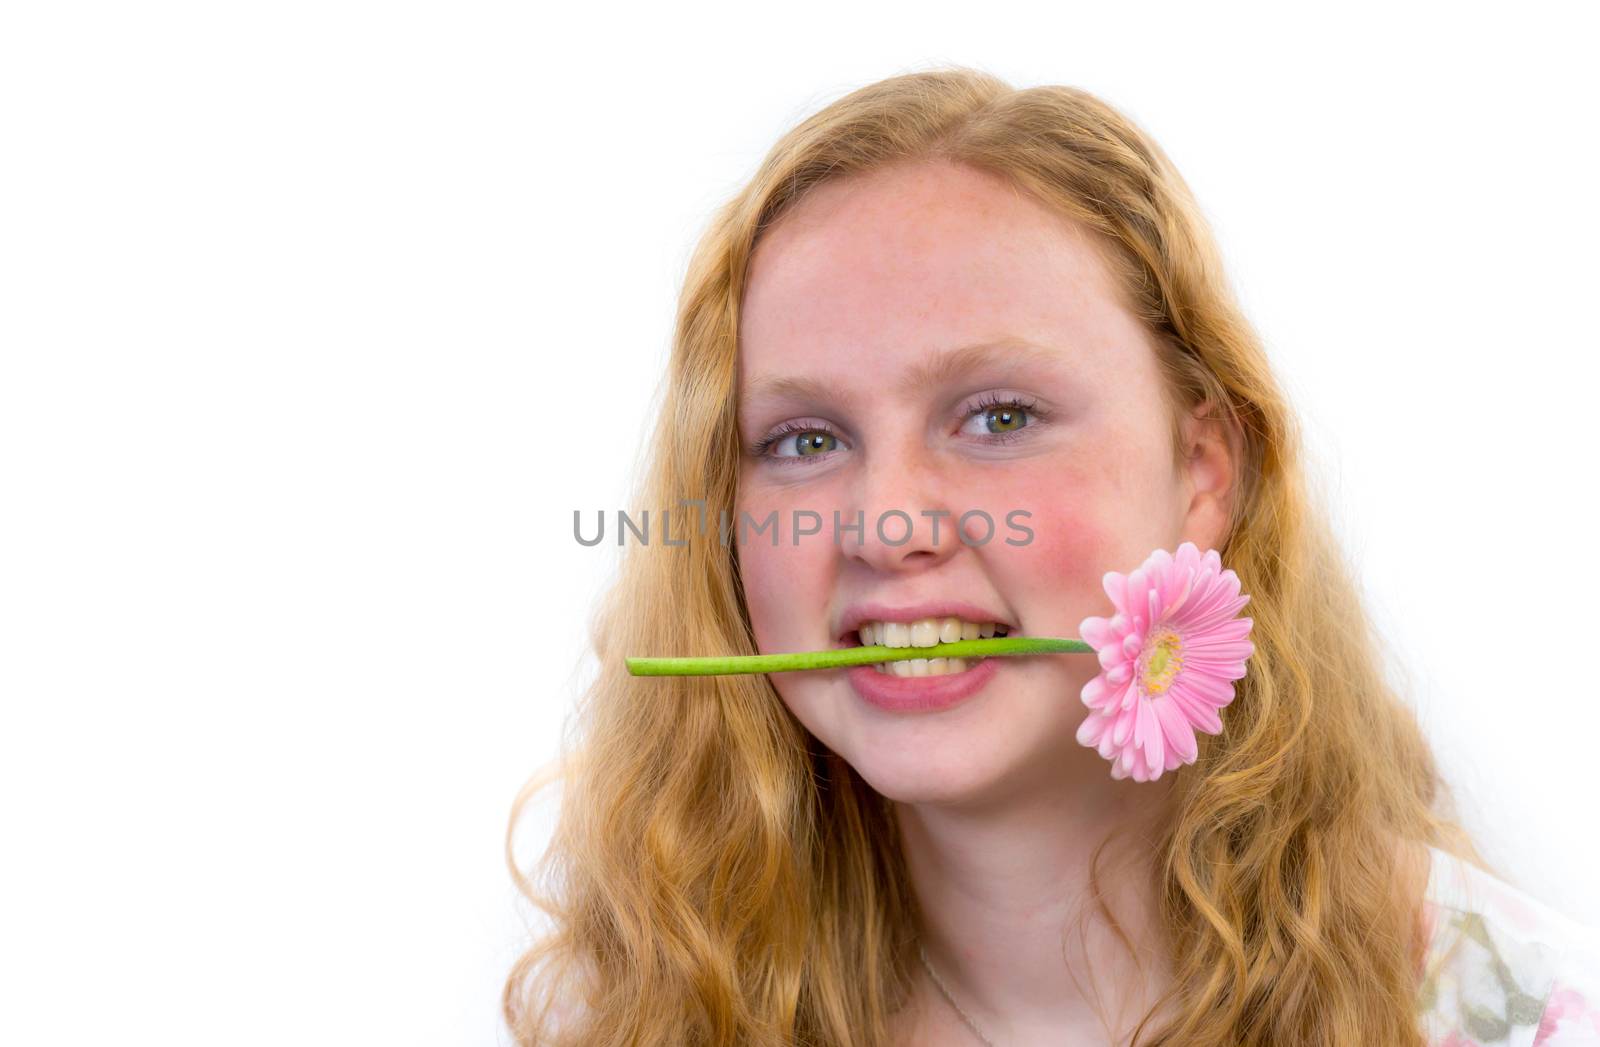 Dutch teenage girl with pink flower in mouth by BenSchonewille